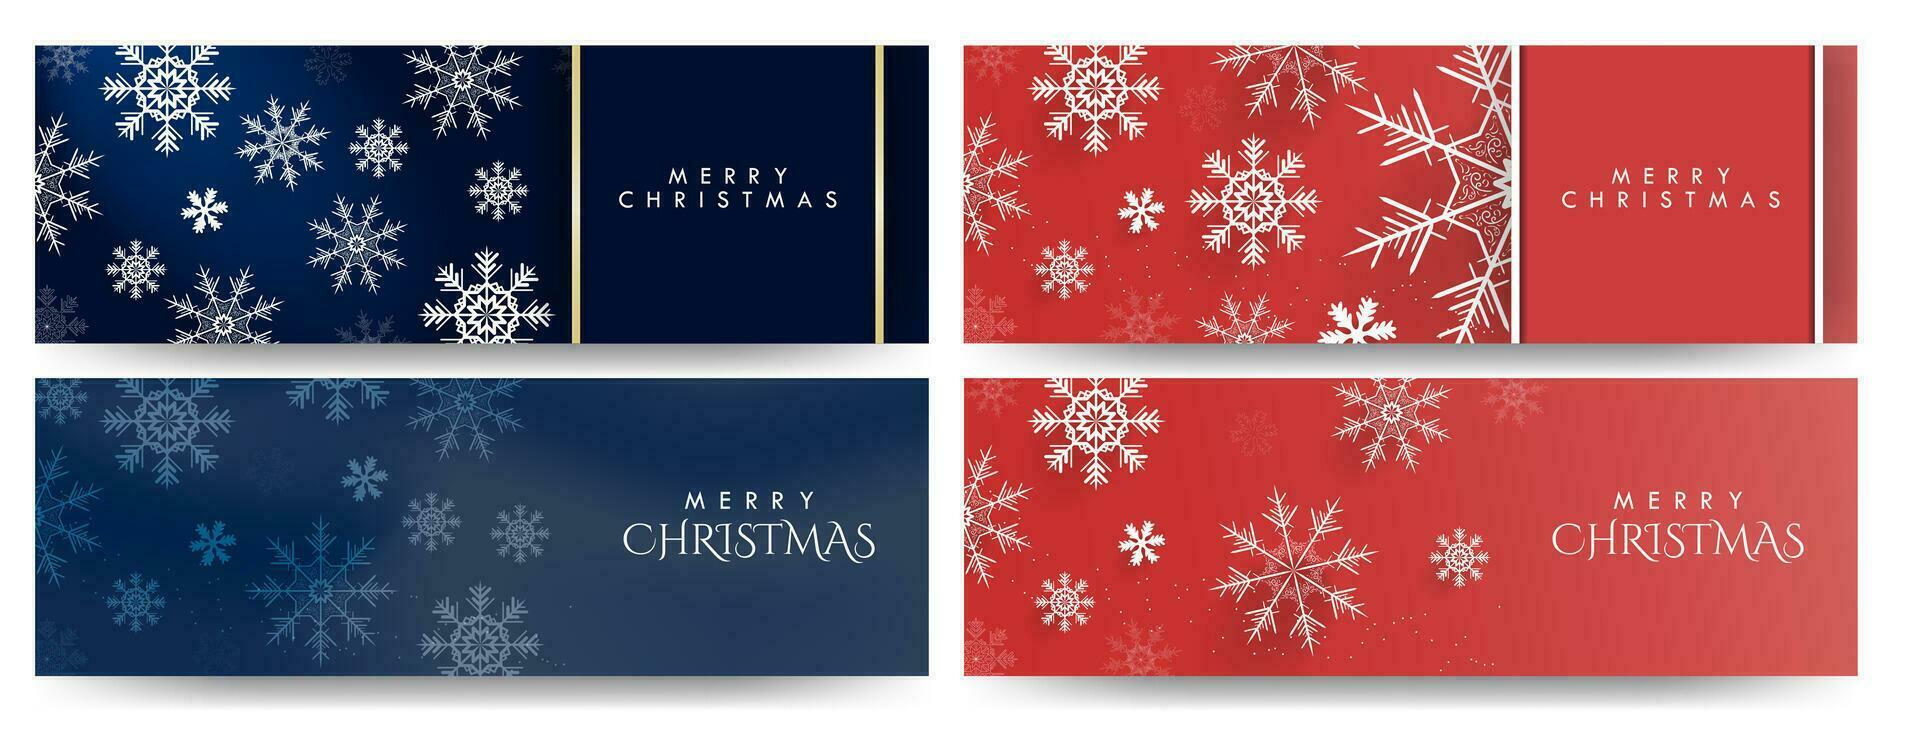 Set of Horizontal Christmas Banners with copy space. Blue Gradient Christmas banner with white snowflakes, gold embellishments. Red Christmas banners with big 3d snowflakes. Vector Illustration.